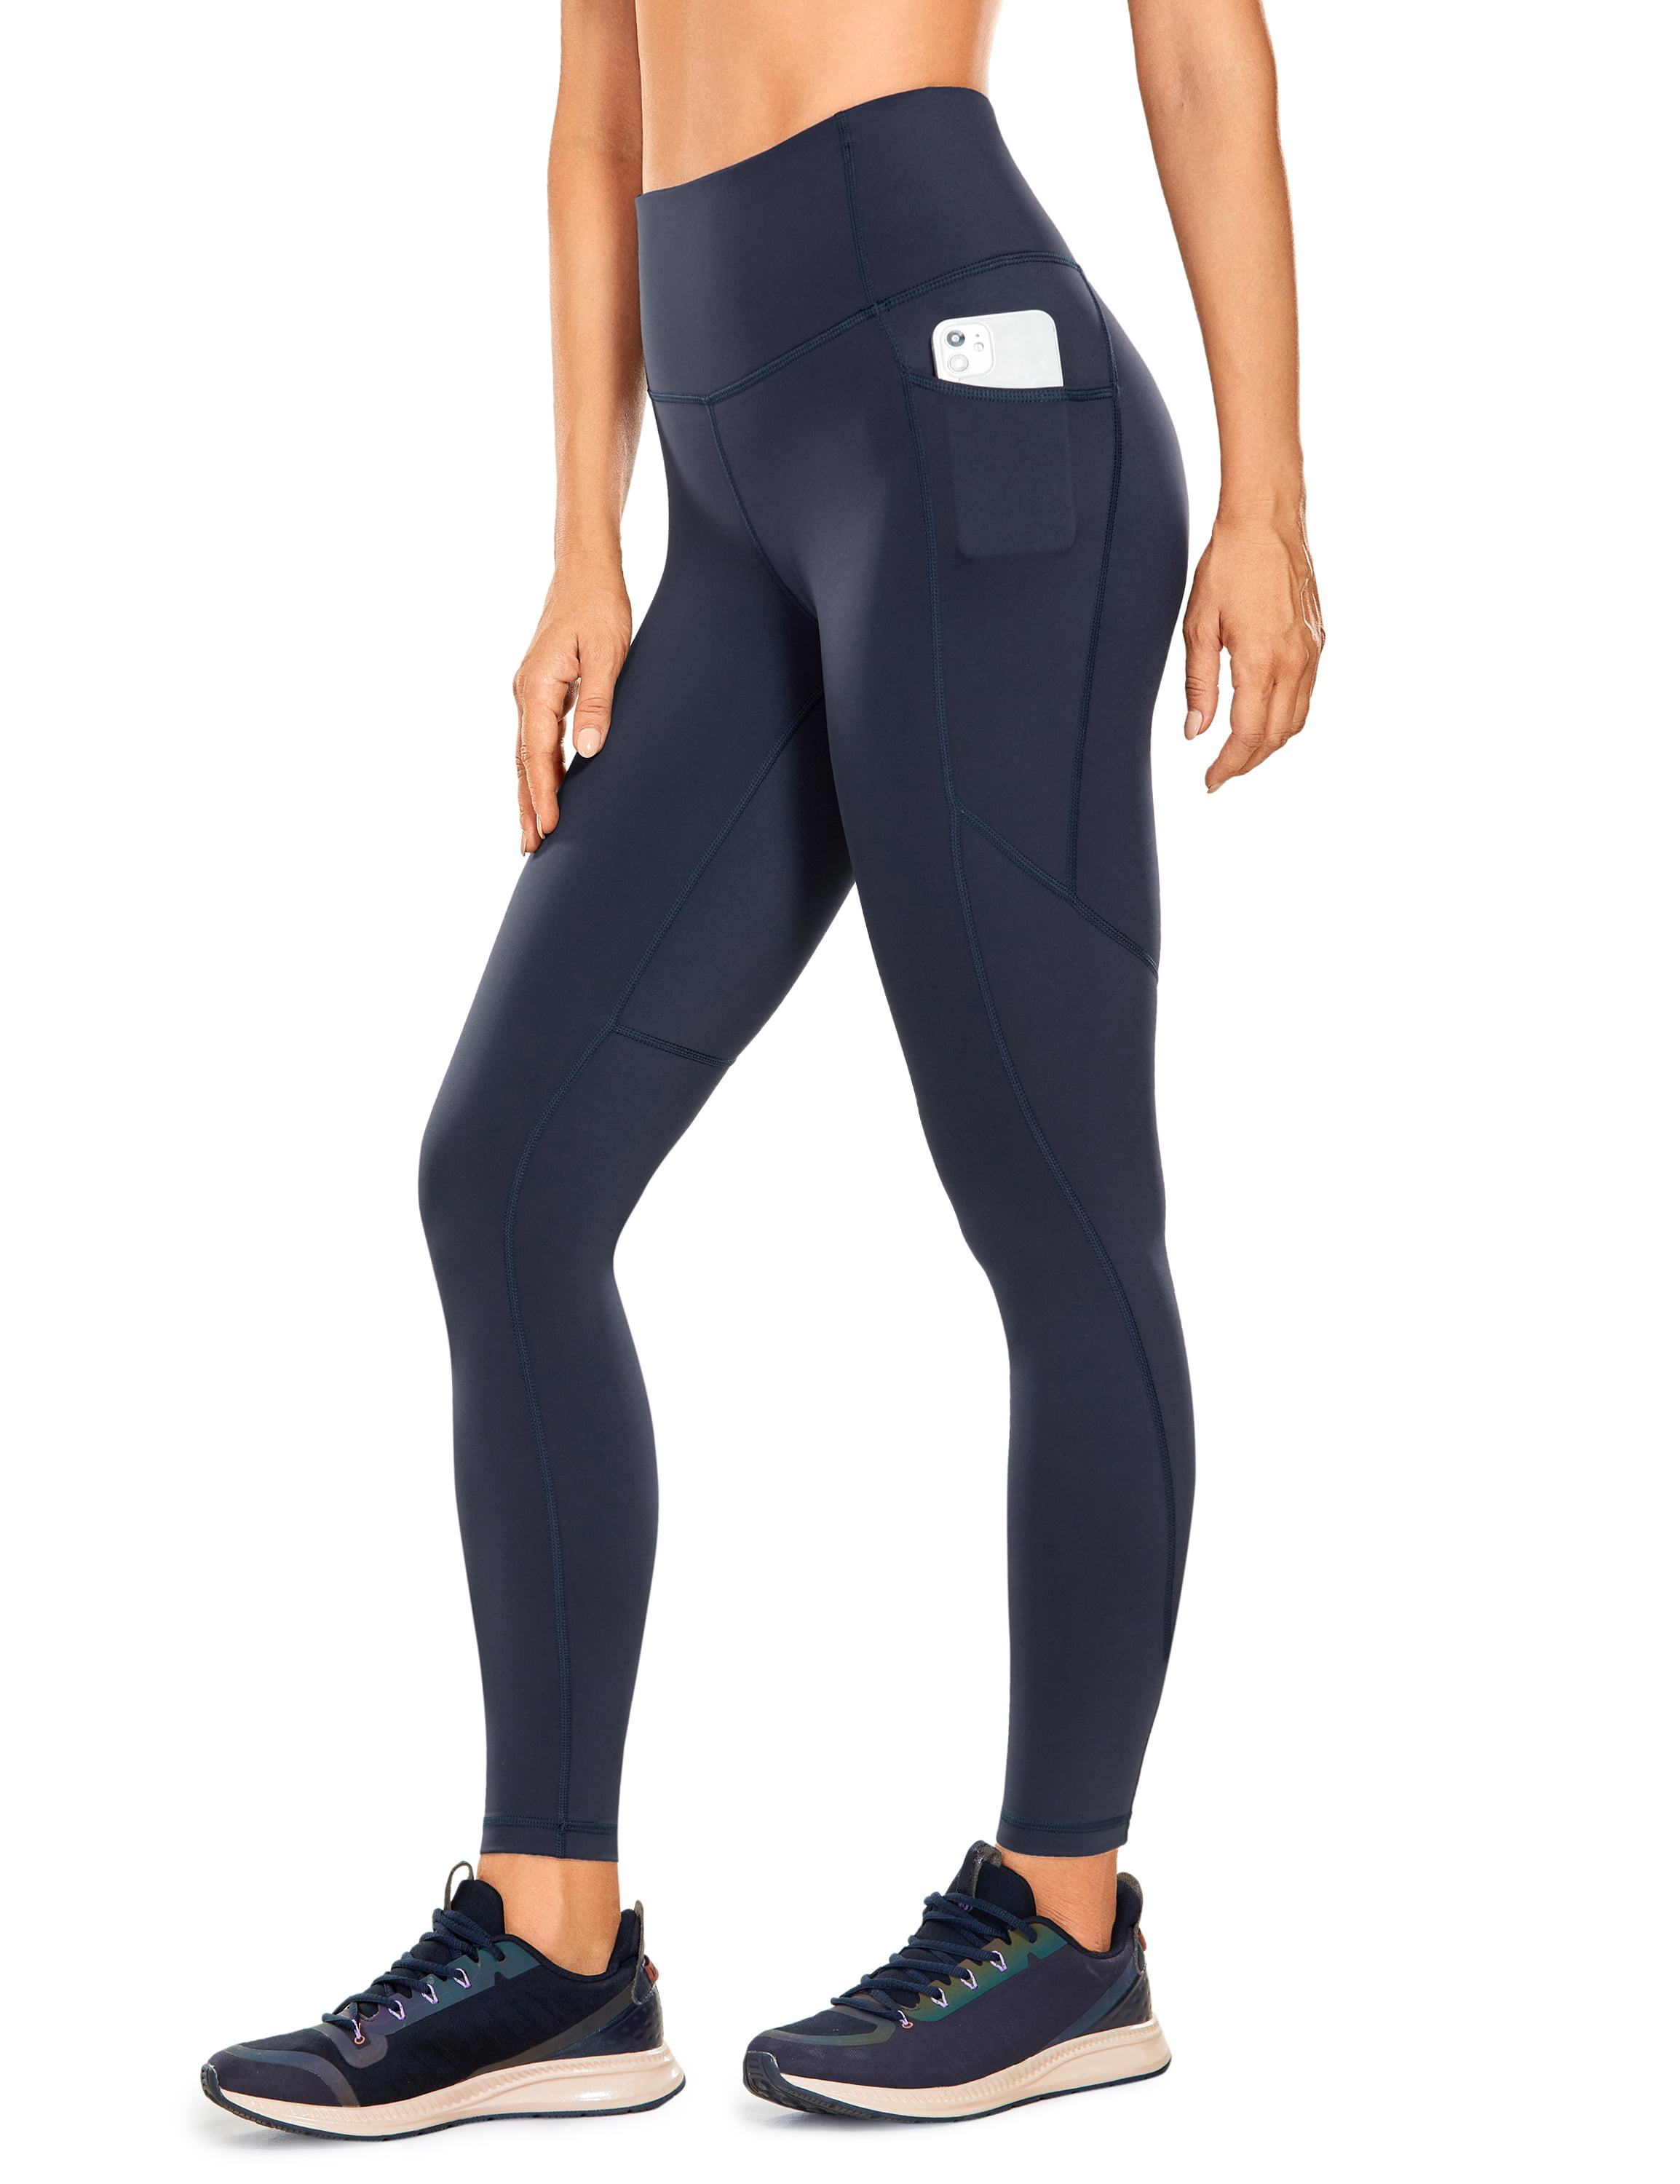 CRZ YOGA Womens High Waisted Yoga Pants with Pockets Athletic Leggings-28 inches 